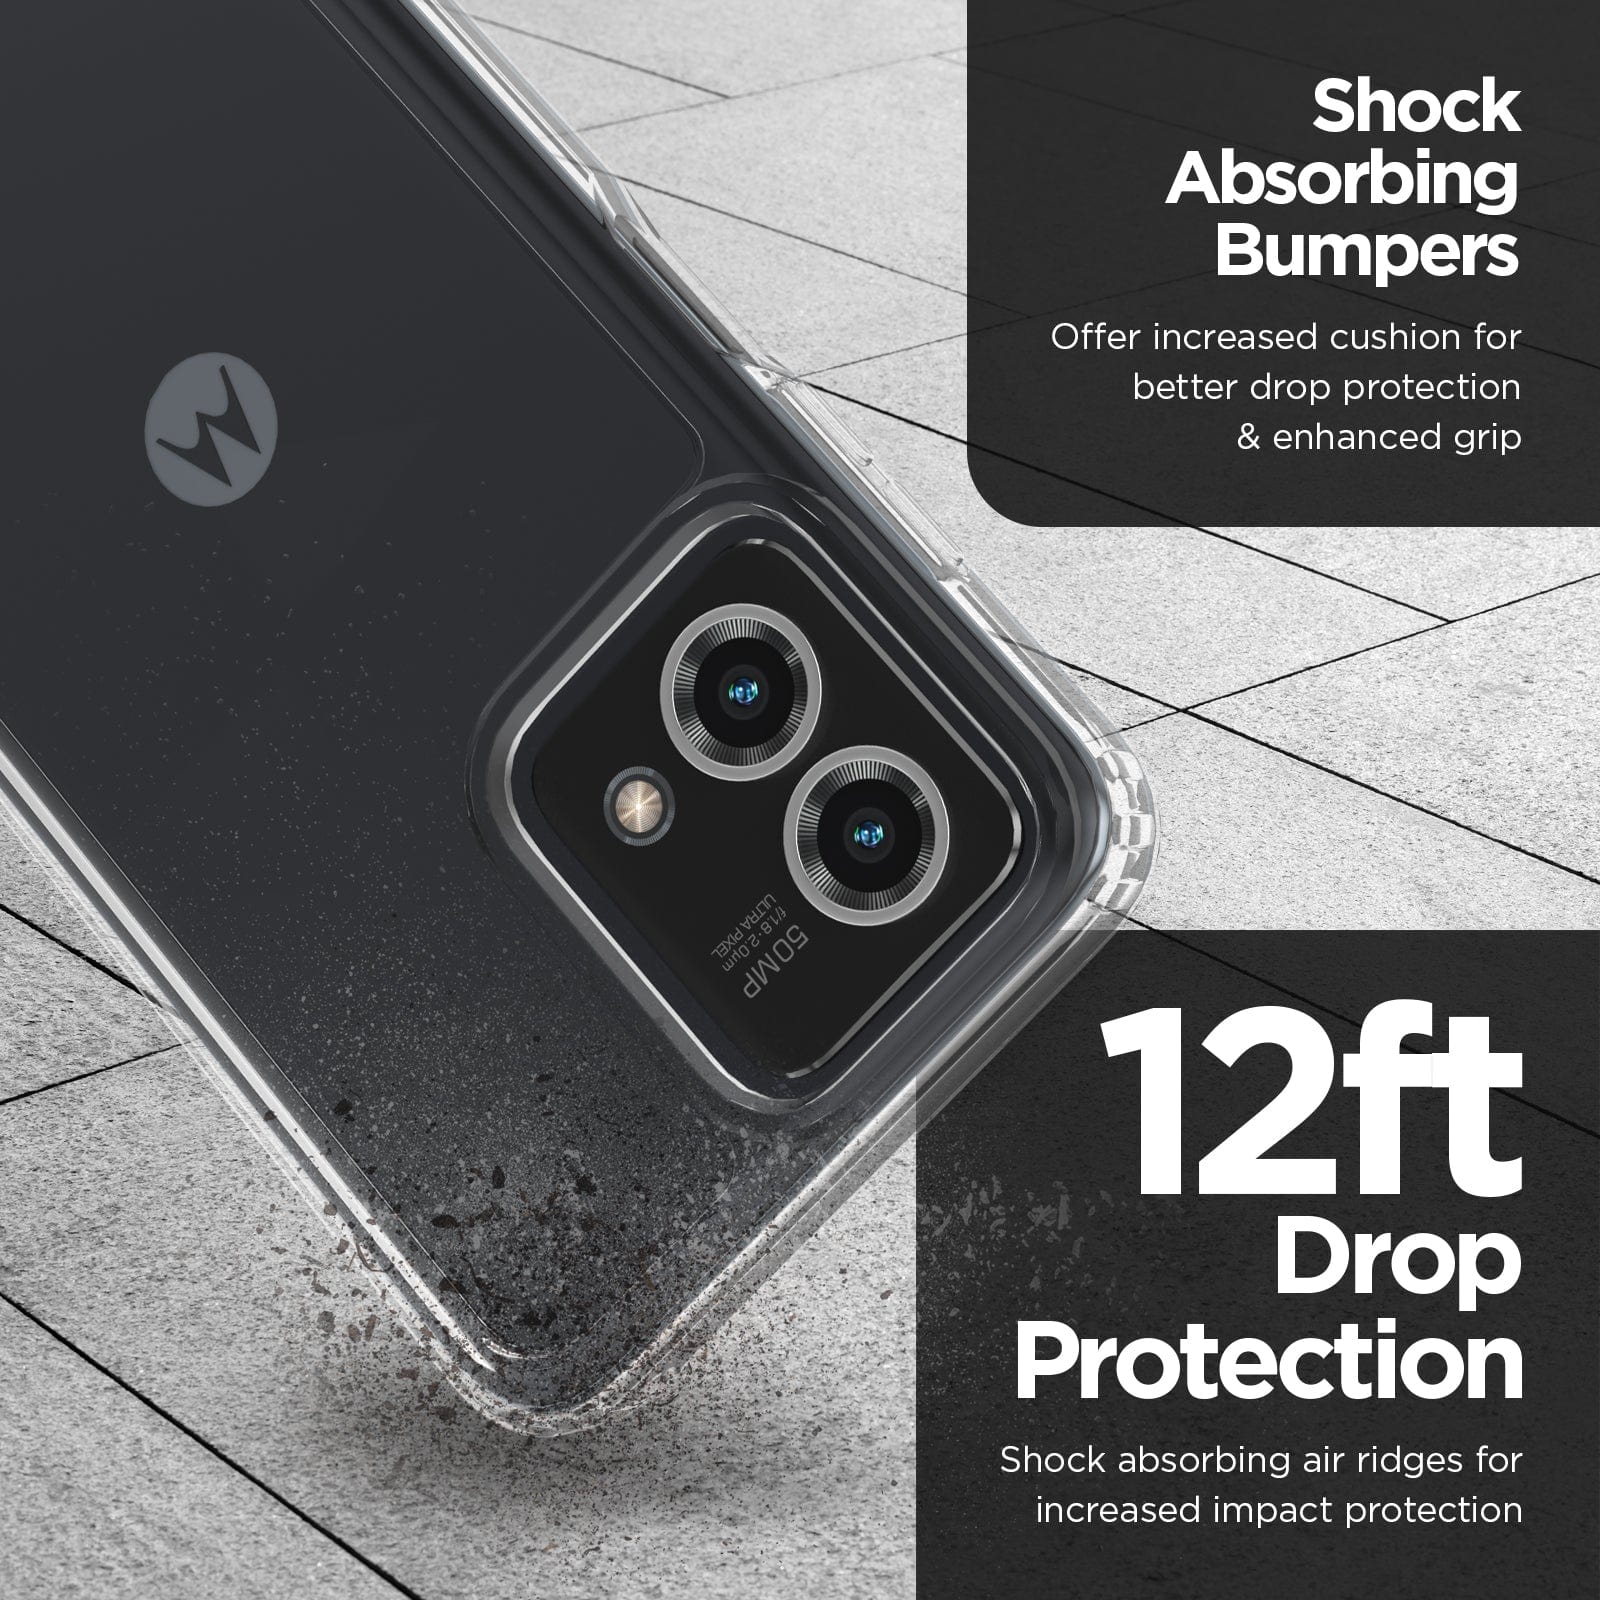 Shock absorbing bumpers. Offer increased cushion for better drop protection & enhanced grip. 12ft Drop Protection. Shock absorbing air ridges for increased impact protection. 